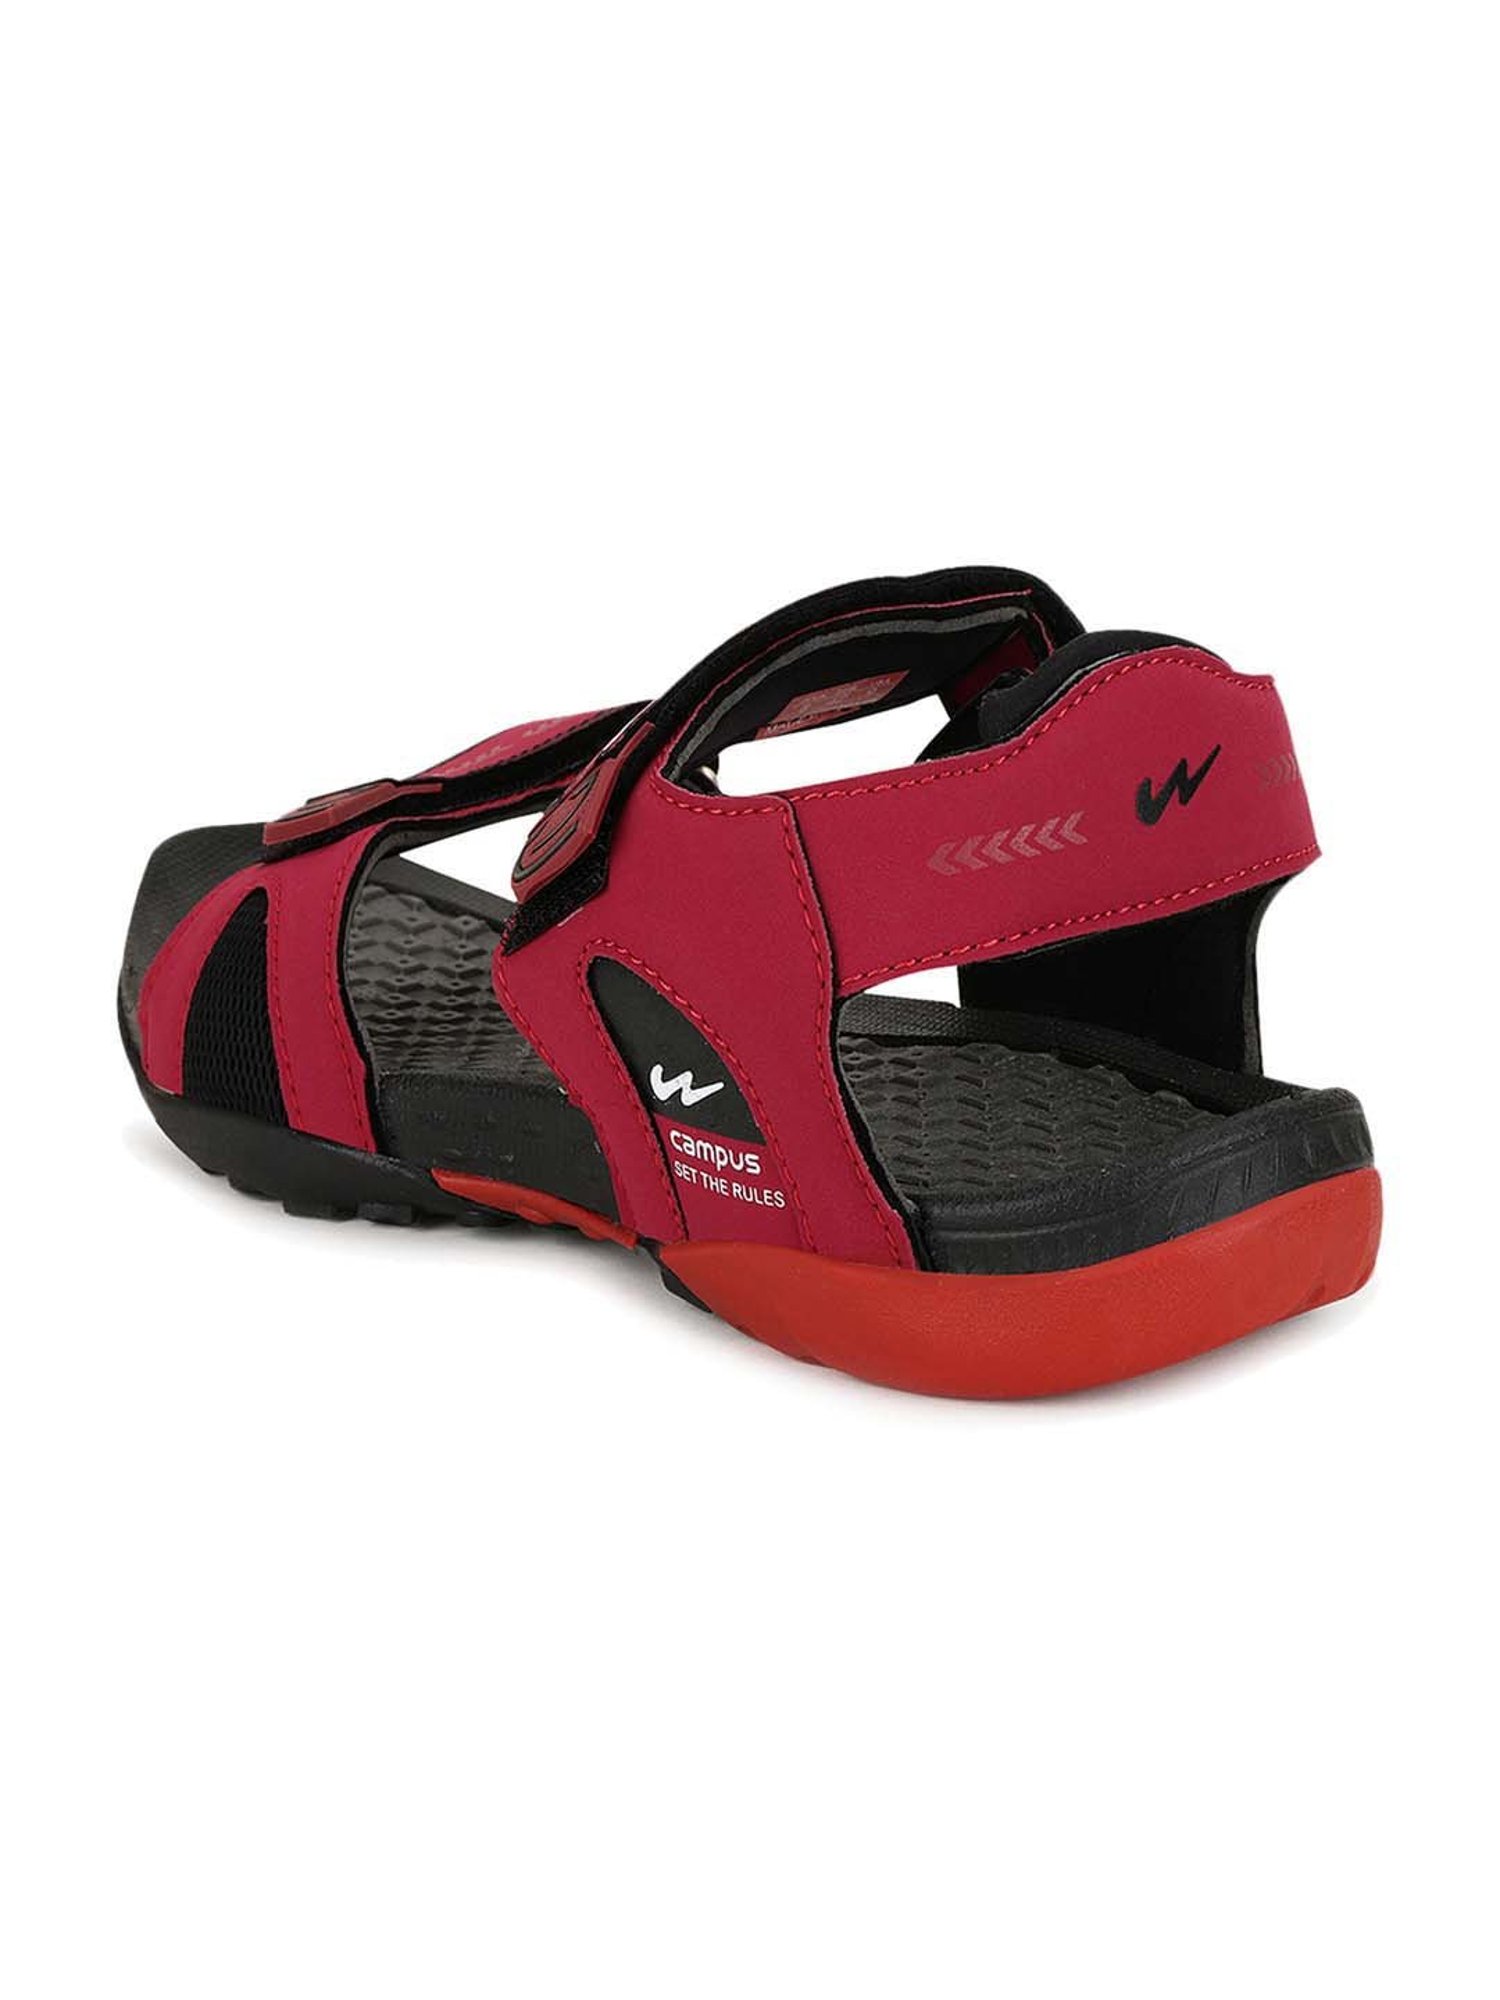 Campus Kids SD-053C Navy-RED Outdoor Sandals -3 UK/India : Amazon.in:  Fashion